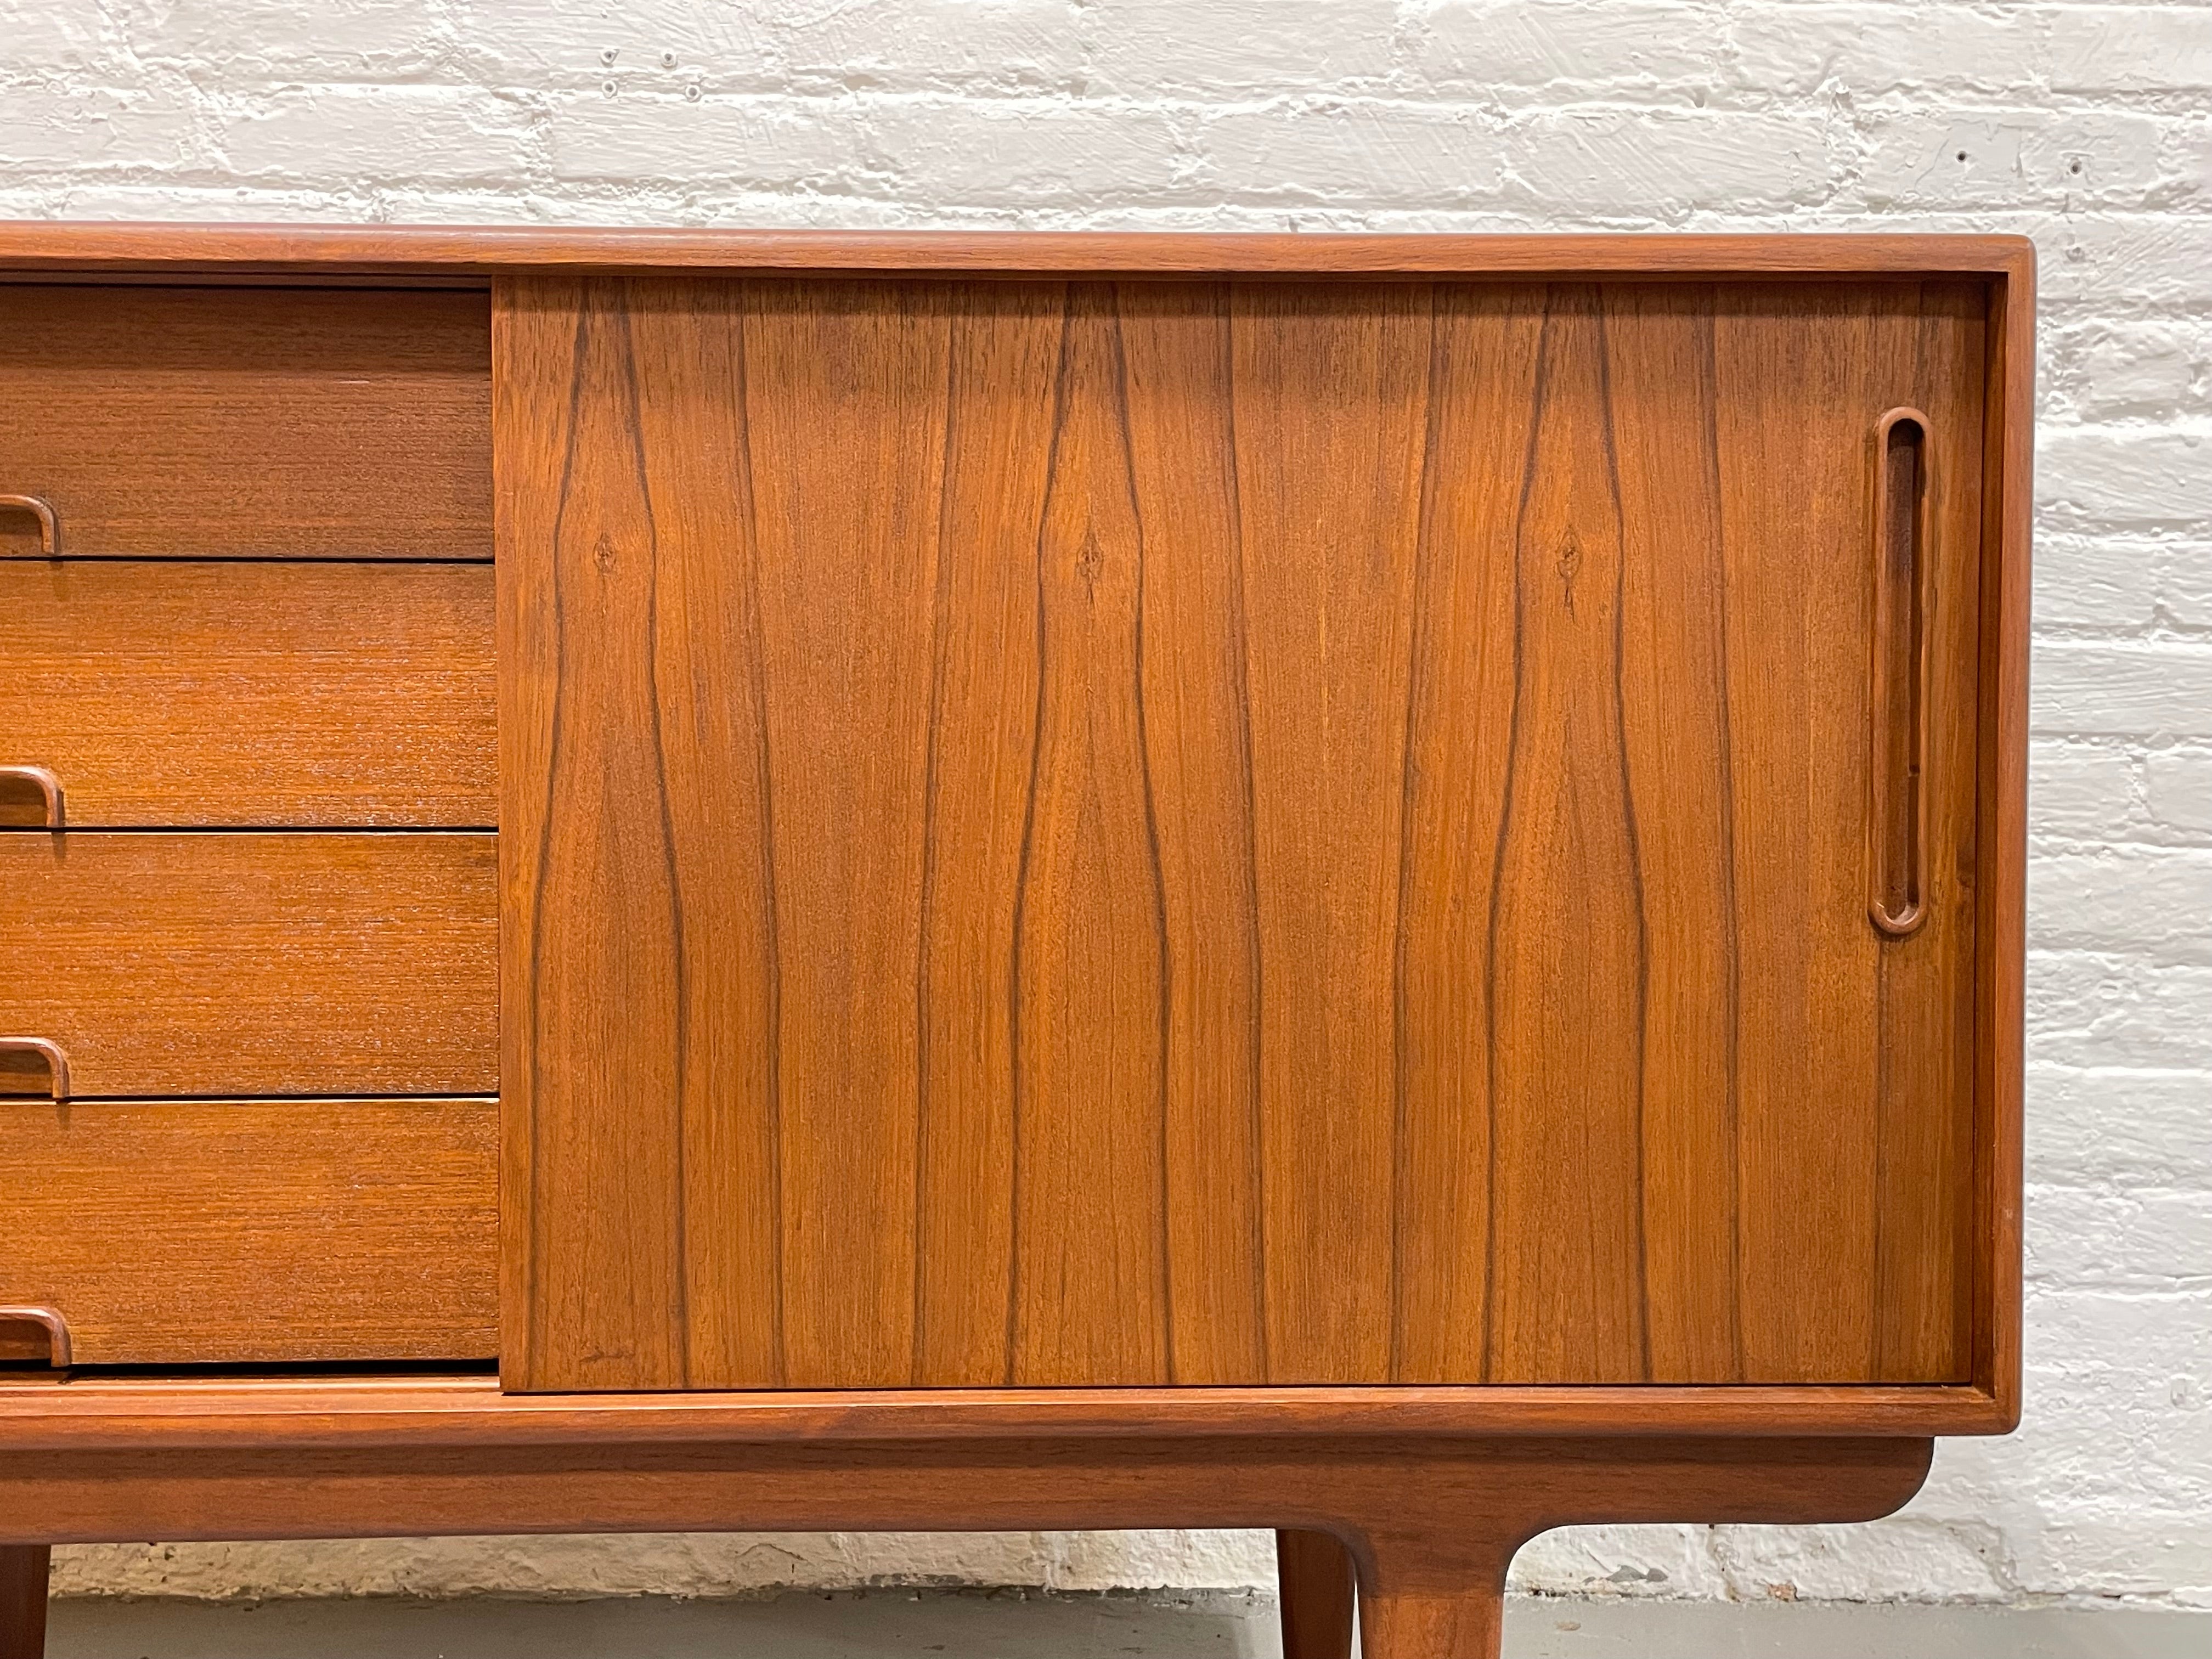 Apartment Sized DANISH Mid Century Modern styled CREDENZA / Media Stand / Sideboard